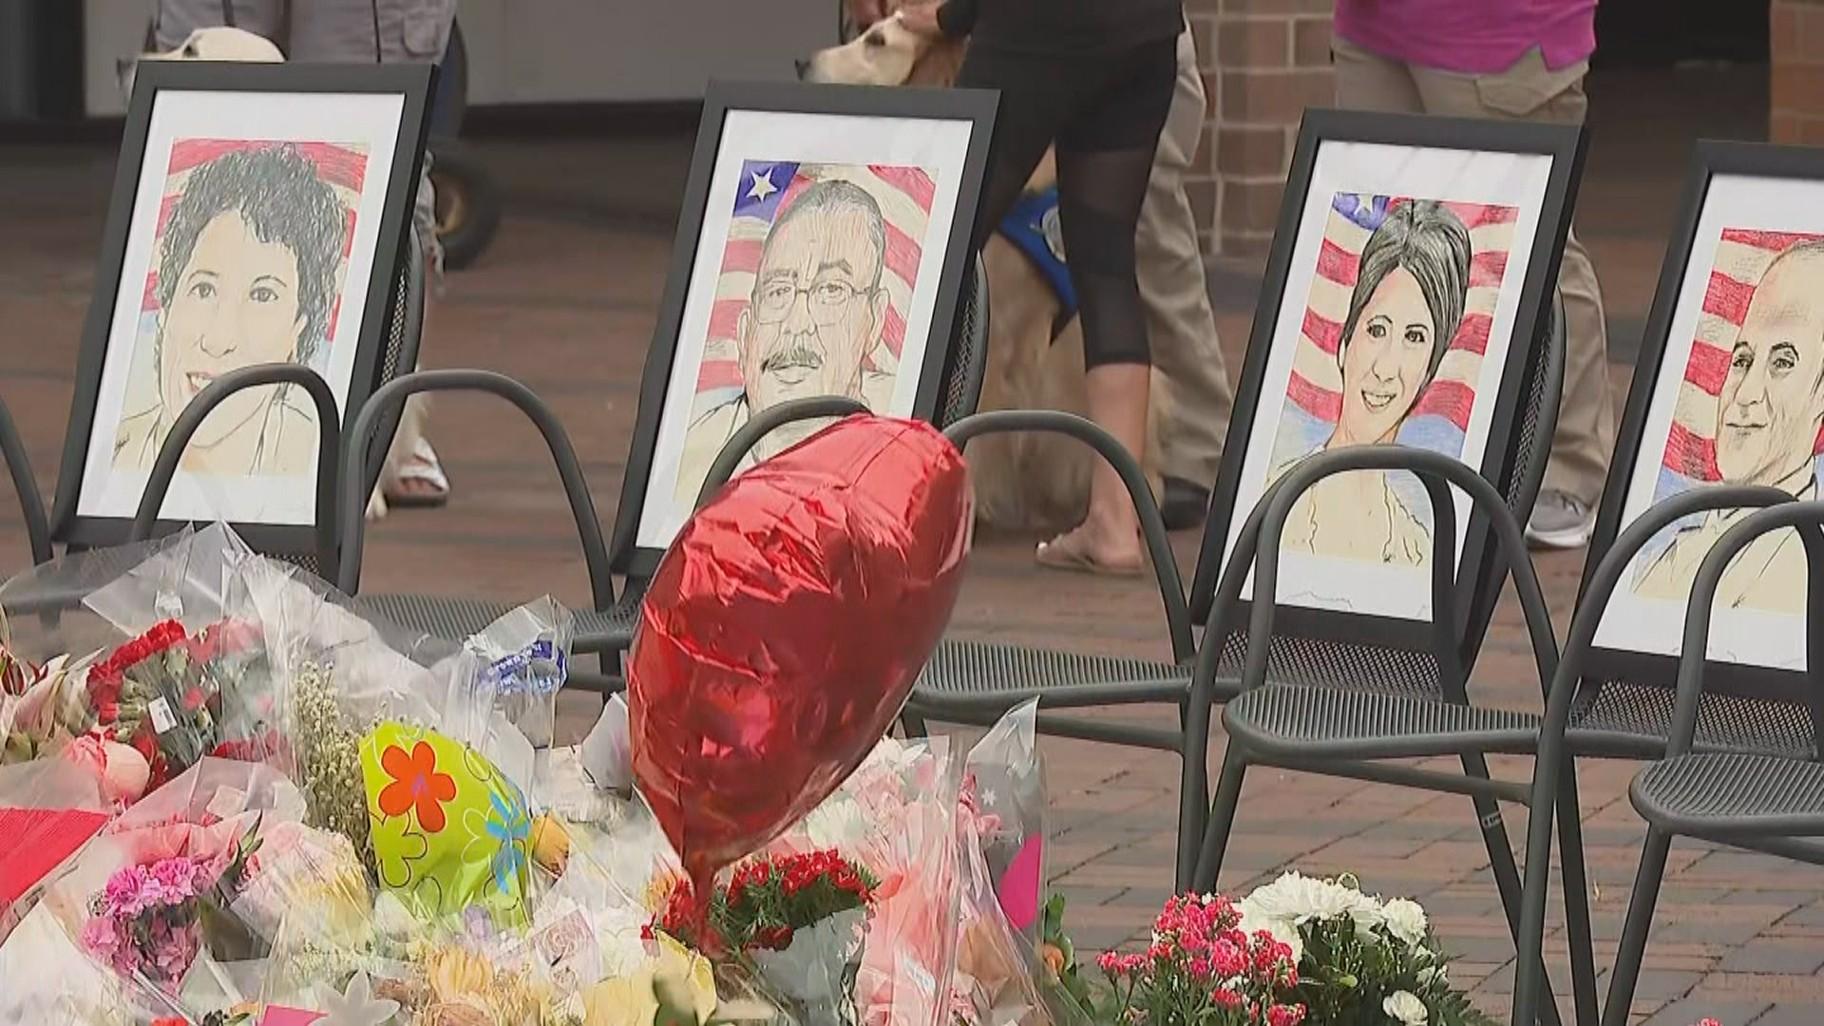 A memorial to the victims of the July 4, 2022, shooting in Highland Park. (WTTW News)